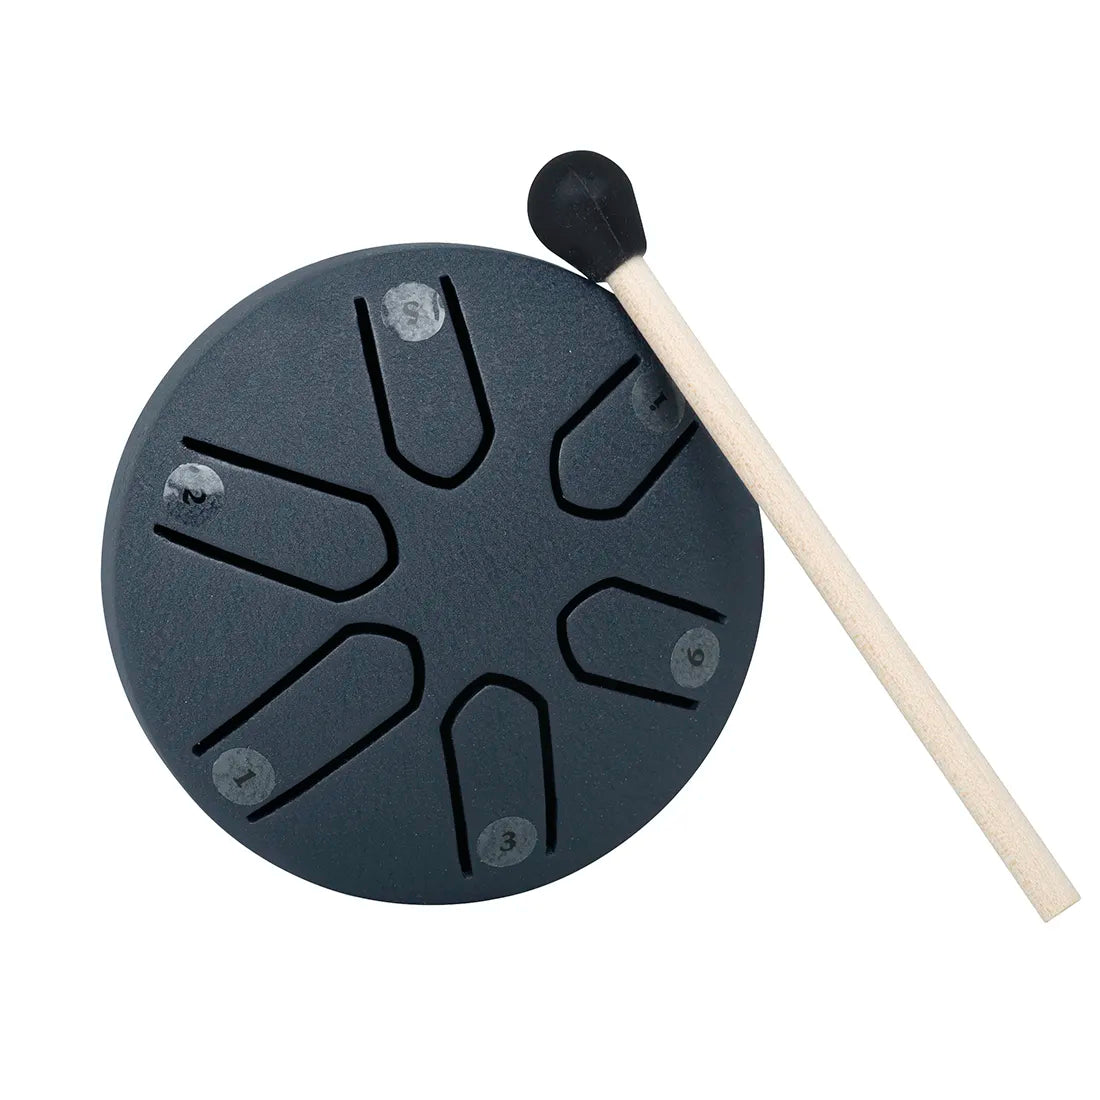 3 Inch 6-Tone Steel Tongue Drum Mini Hand Pan Drums with Drumsticks